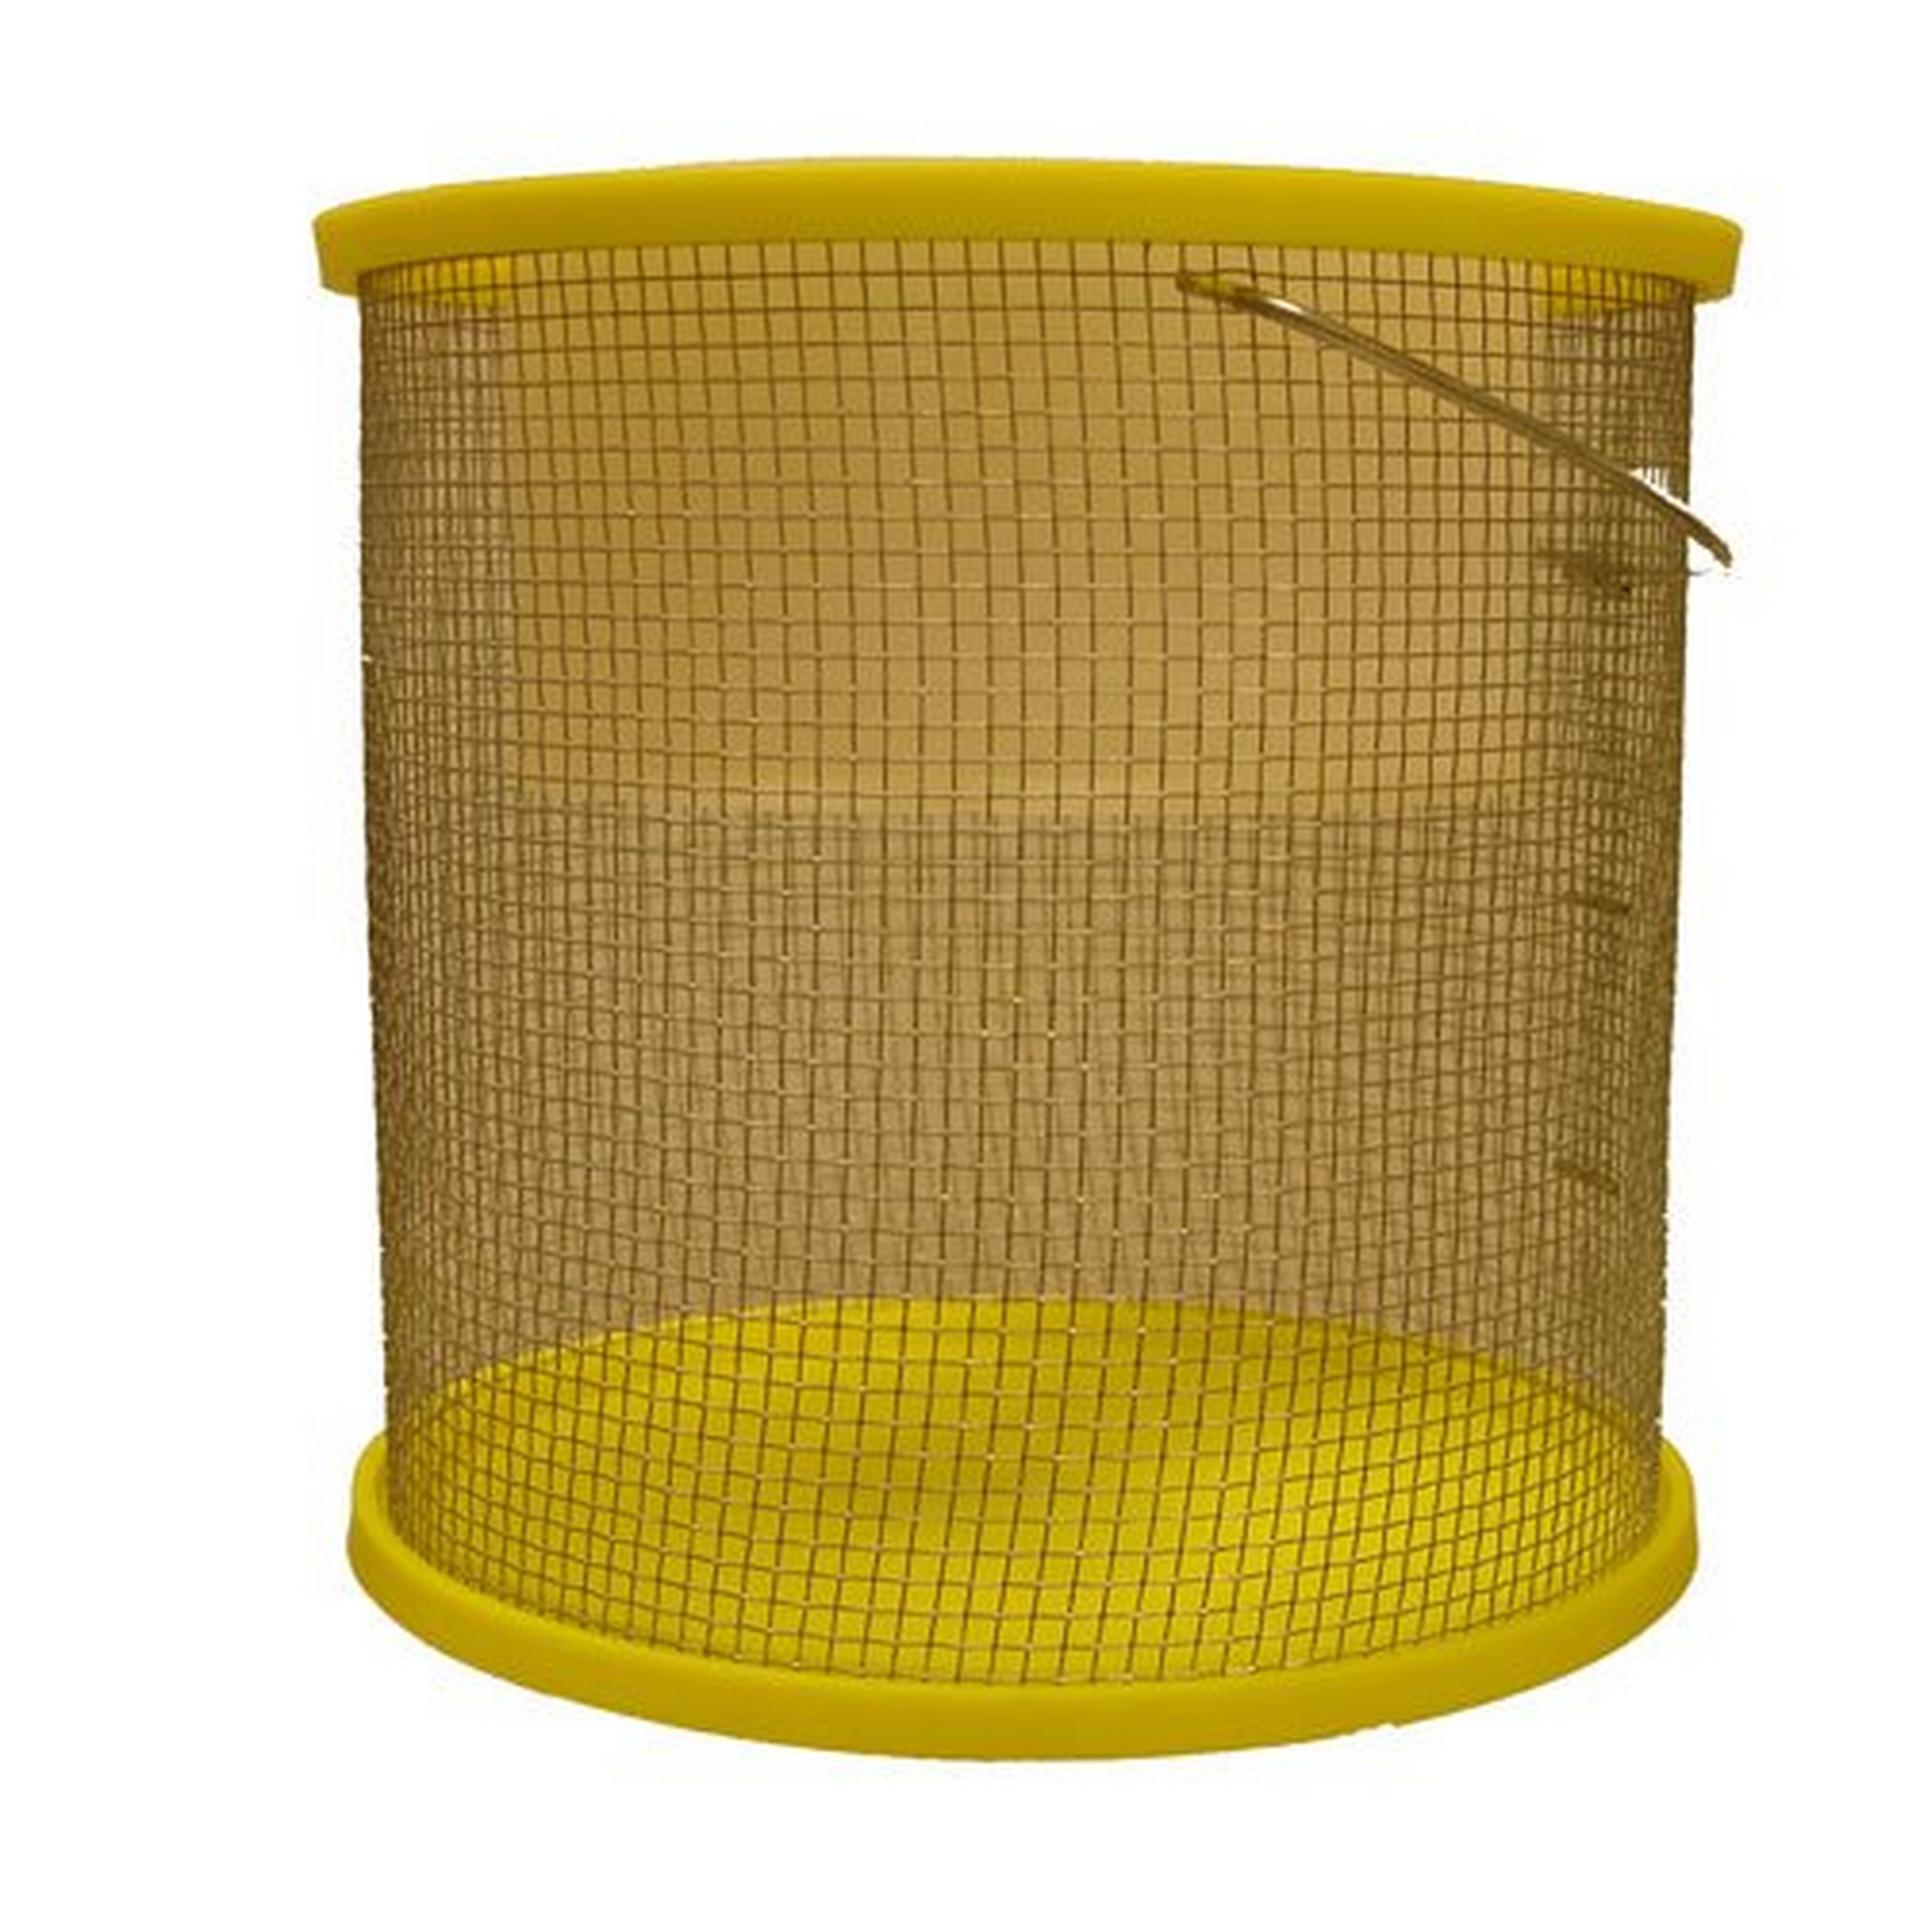 Buy Approved Bait Bucket To Ease Fishing 